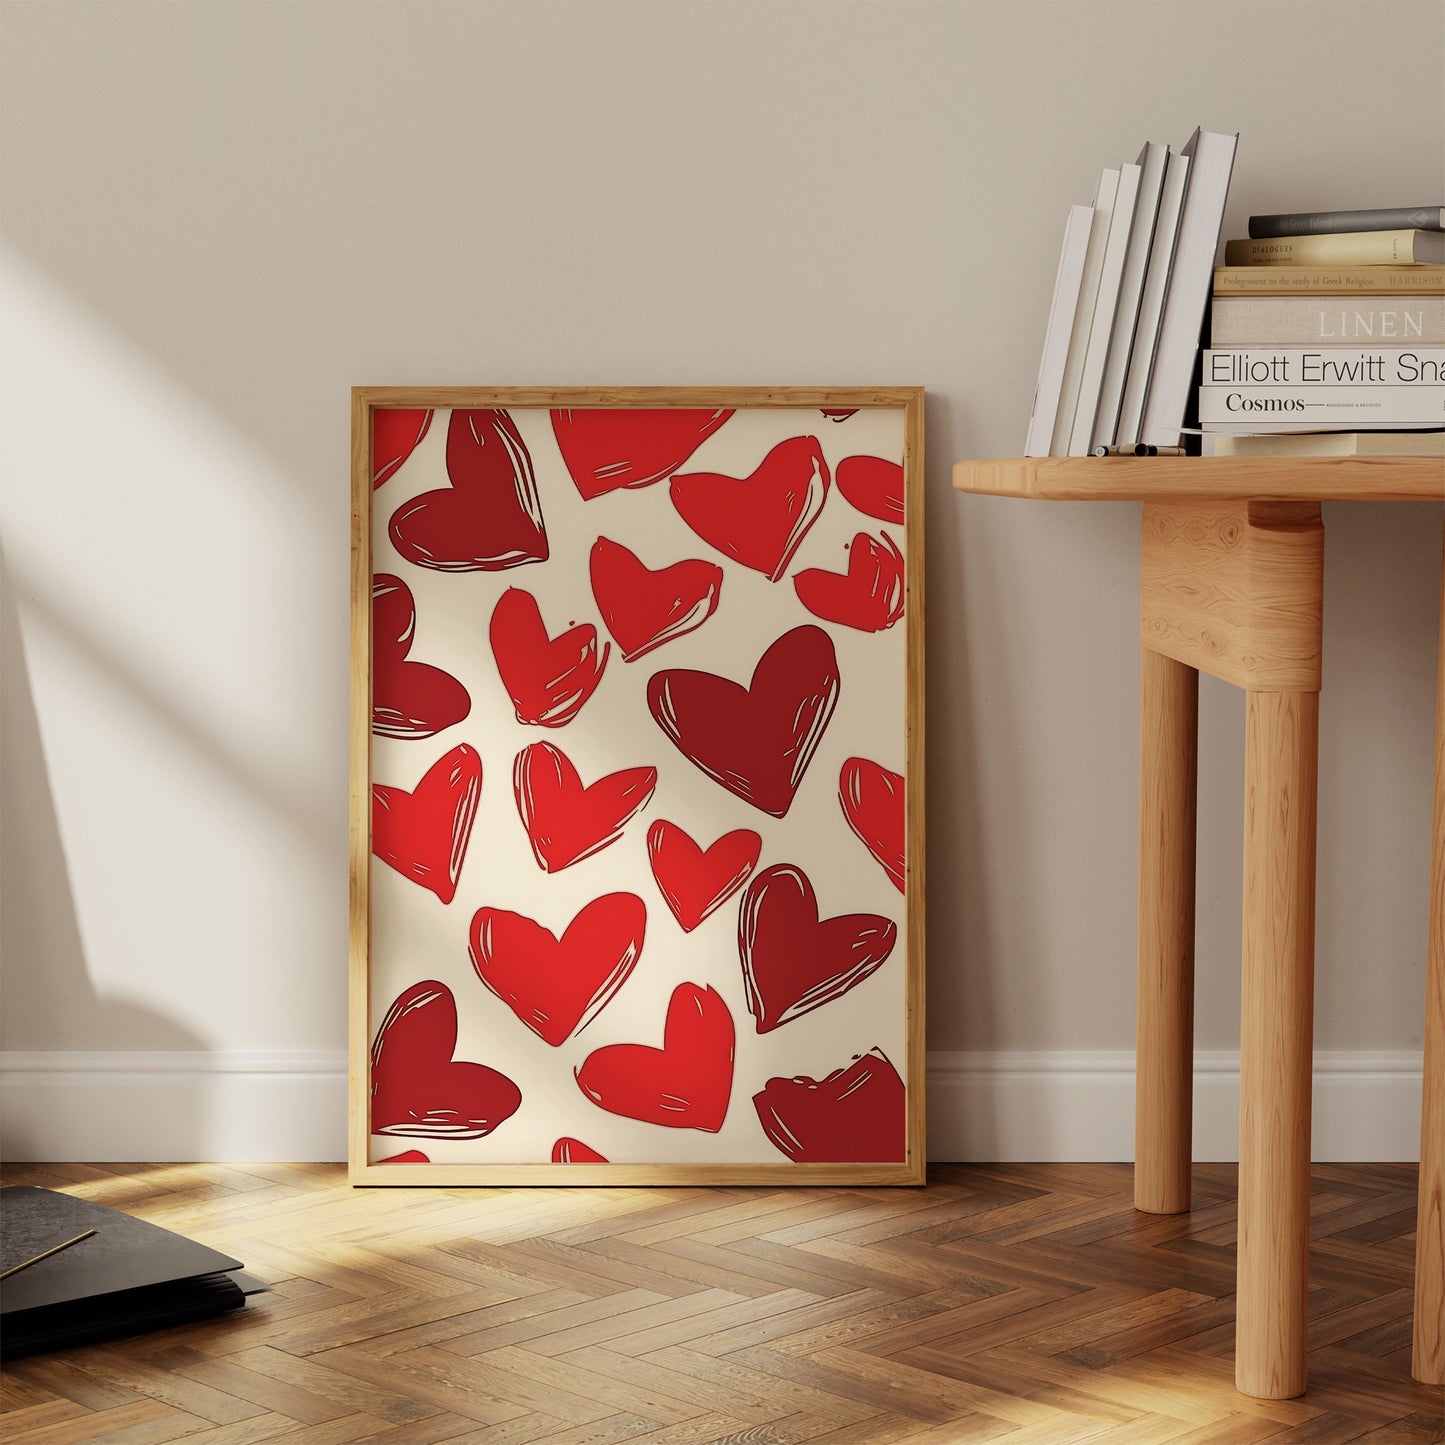 Art print with red hearts on a cream background leaning against a wall in a room with wooden floor.